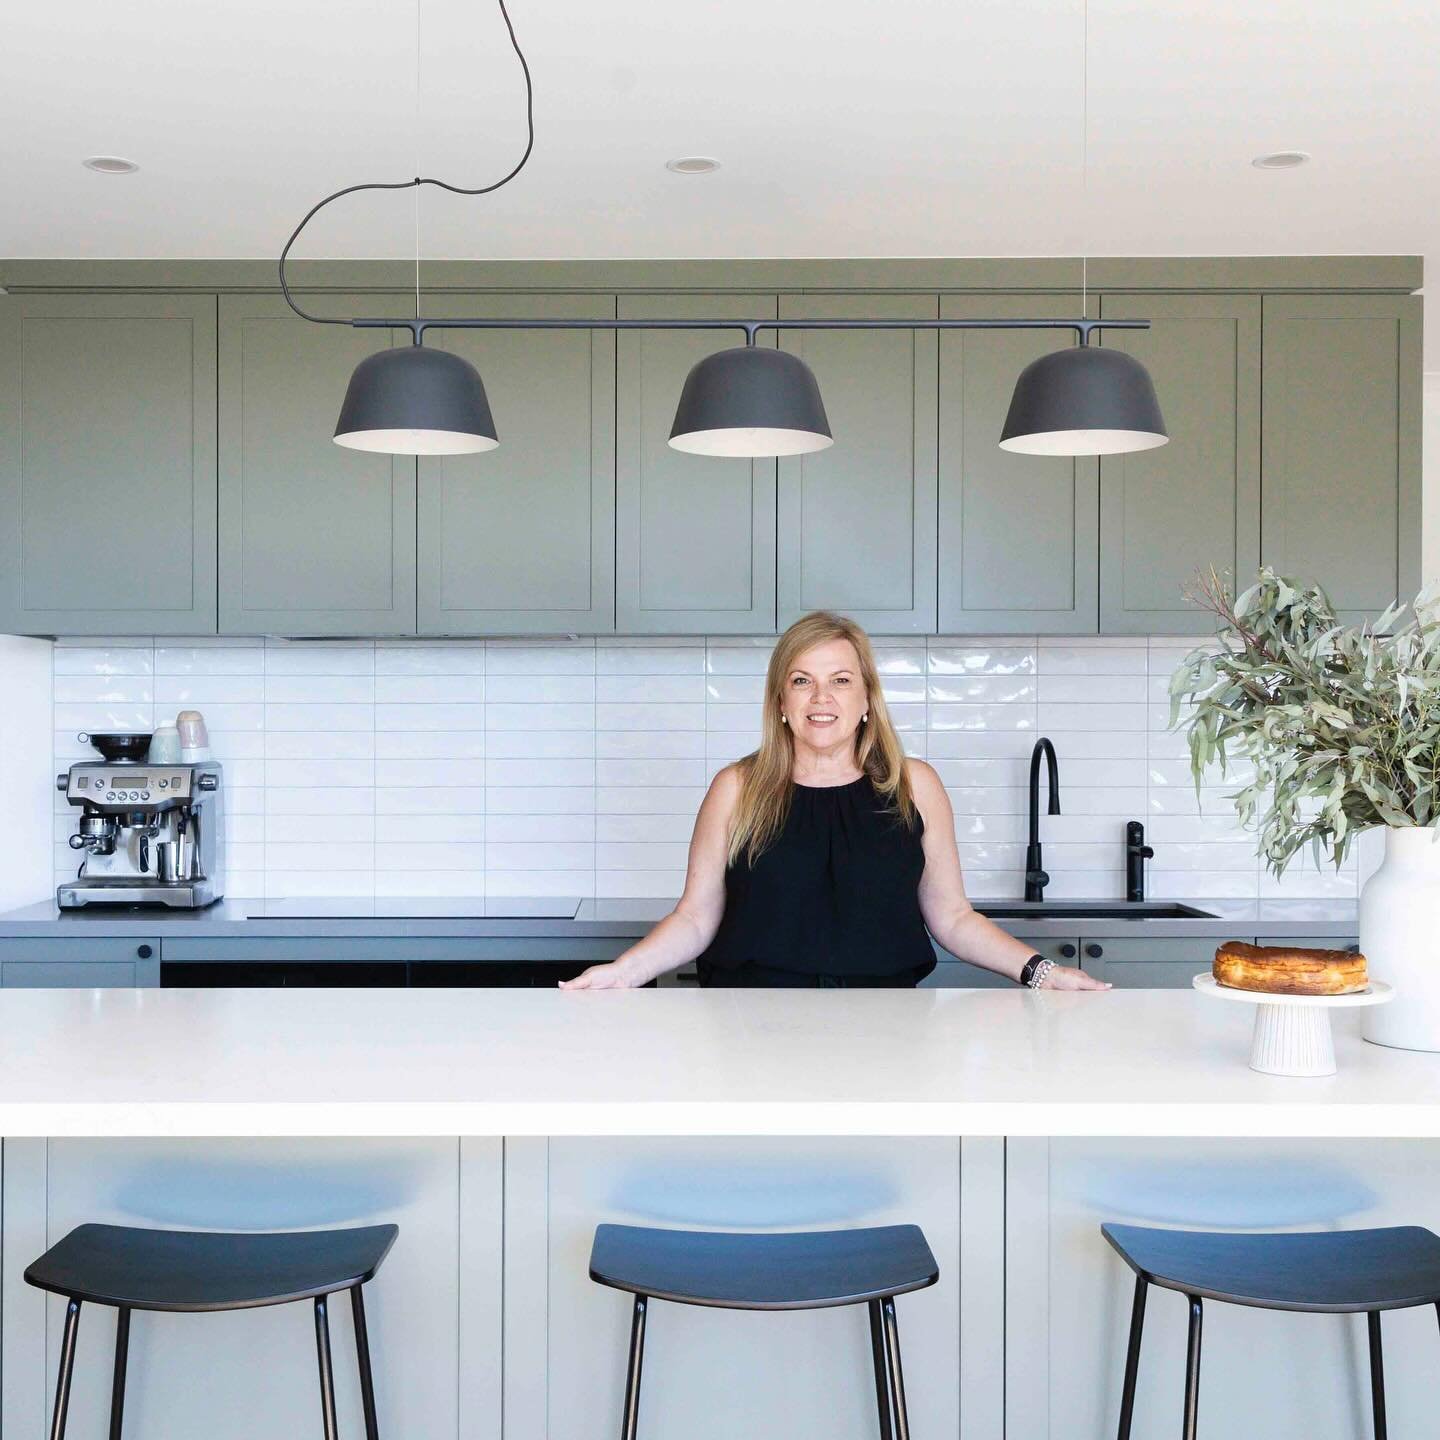 This is the beautiful kitchen of a home I recently worked on in Tyabb. 🌱 Whichever angle you look at it, it has beauty and function.

Surrounded by greenery I just had to bring the outside in with the colour palette, also the home has animals and is